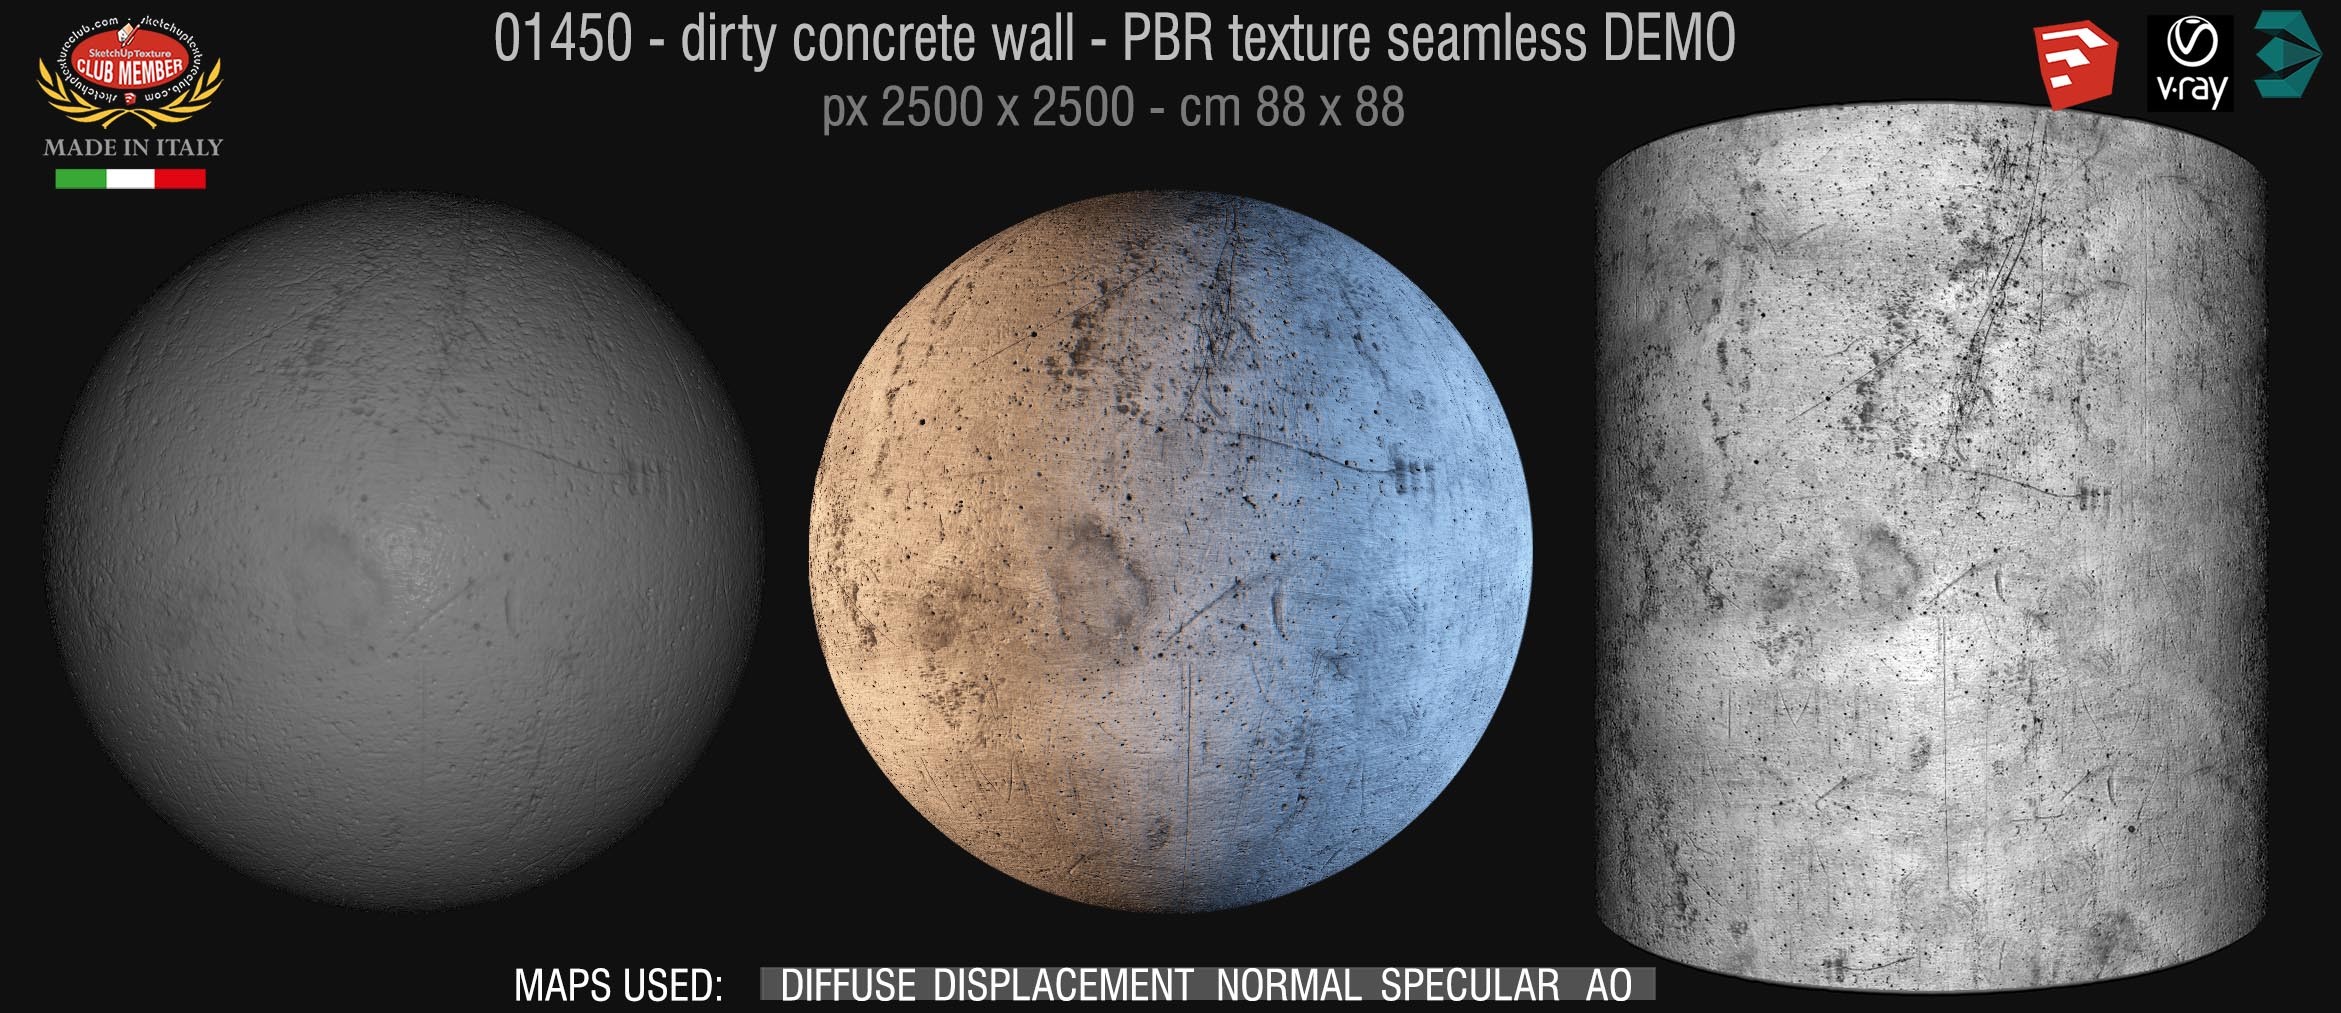 01450 Concrete bare dirty wall PBR texture seamless DEMO